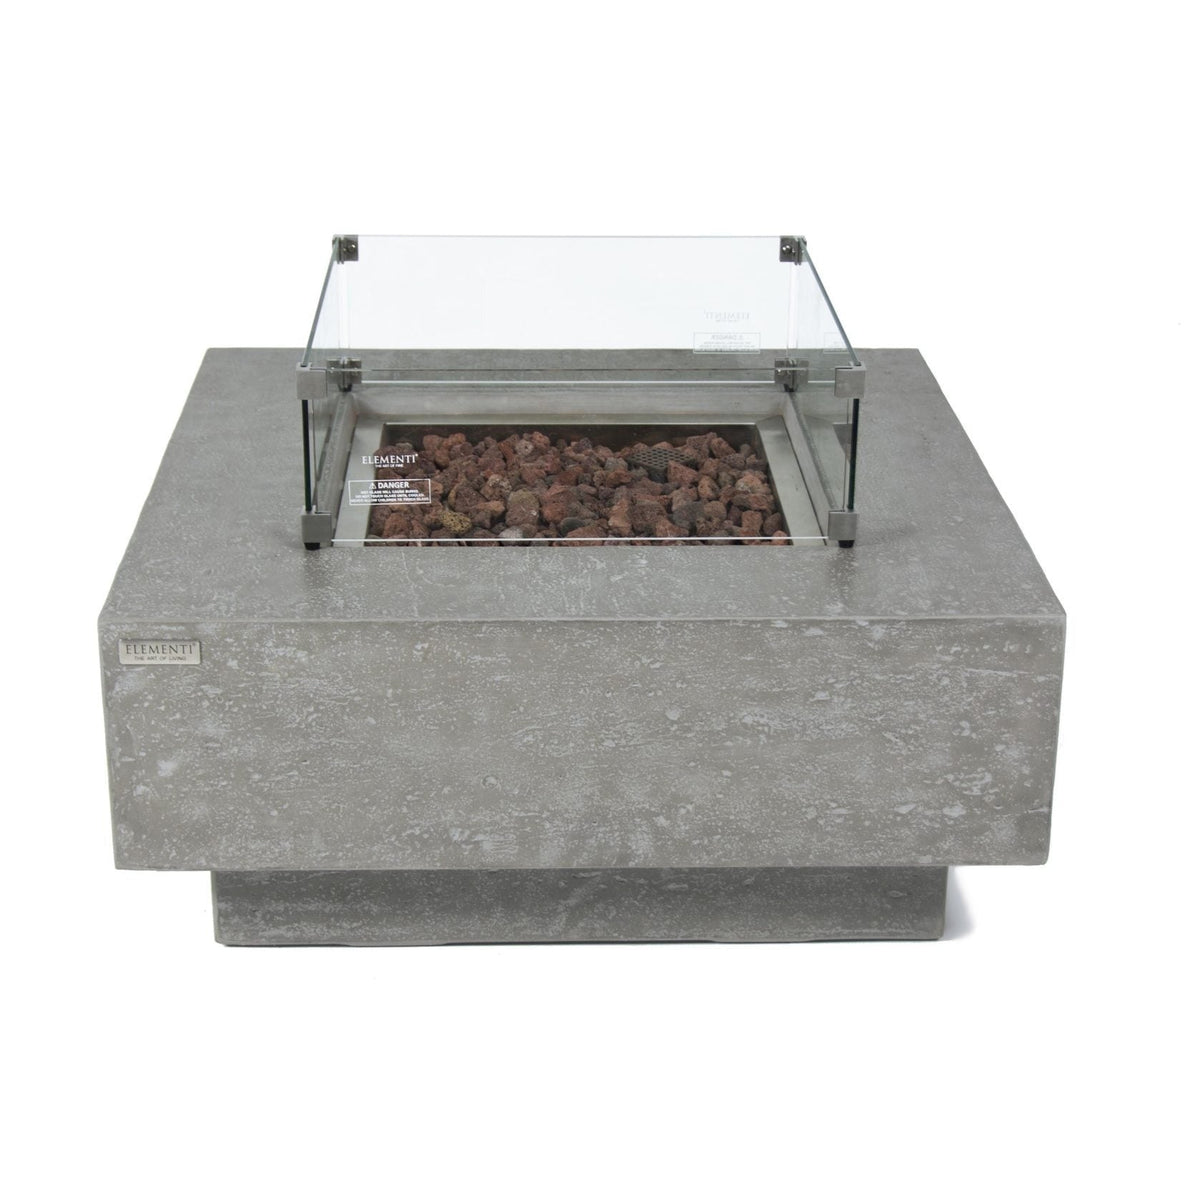 Elementi Manhattan Fire Pit Table in Light Gray with wind screen